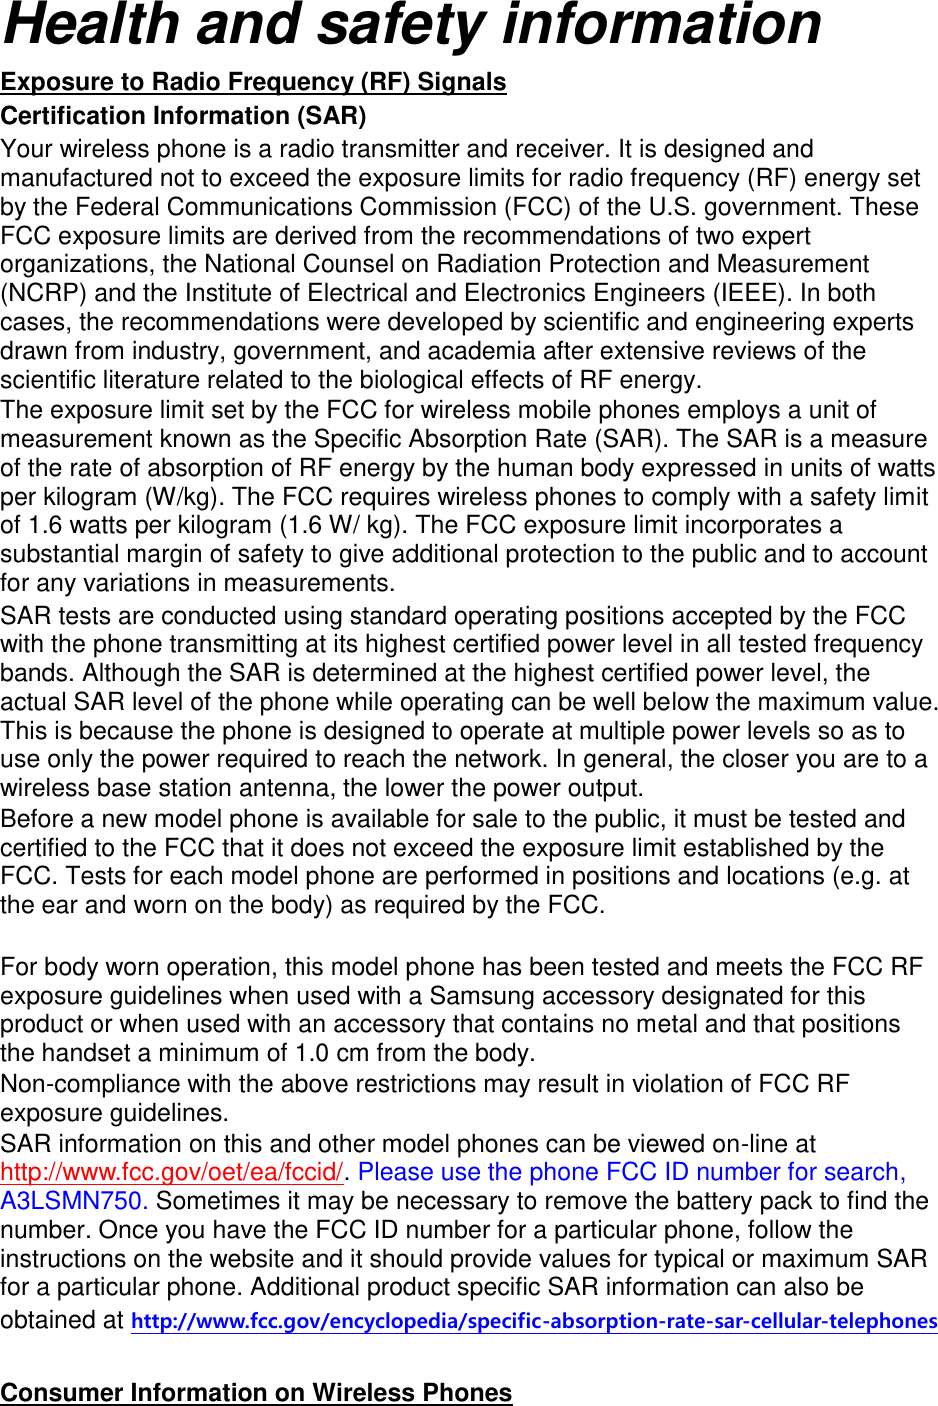 Health and safety information Exposure to Radio Frequency (RF) Signals Certification Information (SAR) Your wireless phone is a radio transmitter and receiver. It is designed and manufactured not to exceed the exposure limits for radio frequency (RF) energy set by the Federal Communications Commission (FCC) of the U.S. government. These FCC exposure limits are derived from the recommendations of two expert organizations, the National Counsel on Radiation Protection and Measurement (NCRP) and the Institute of Electrical and Electronics Engineers (IEEE). In both cases, the recommendations were developed by scientific and engineering experts drawn from industry, government, and academia after extensive reviews of the scientific literature related to the biological effects of RF energy. The exposure limit set by the FCC for wireless mobile phones employs a unit of measurement known as the Specific Absorption Rate (SAR). The SAR is a measure of the rate of absorption of RF energy by the human body expressed in units of watts per kilogram (W/kg). The FCC requires wireless phones to comply with a safety limit of 1.6 watts per kilogram (1.6 W/ kg). The FCC exposure limit incorporates a substantial margin of safety to give additional protection to the public and to account for any variations in measurements. SAR tests are conducted using standard operating positions accepted by the FCC with the phone transmitting at its highest certified power level in all tested frequency bands. Although the SAR is determined at the highest certified power level, the actual SAR level of the phone while operating can be well below the maximum value. This is because the phone is designed to operate at multiple power levels so as to use only the power required to reach the network. In general, the closer you are to a wireless base station antenna, the lower the power output. Before a new model phone is available for sale to the public, it must be tested and certified to the FCC that it does not exceed the exposure limit established by the FCC. Tests for each model phone are performed in positions and locations (e.g. at the ear and worn on the body) as required by the FCC.      For body worn operation, this model phone has been tested and meets the FCC RF exposure guidelines when used with a Samsung accessory designated for this product or when used with an accessory that contains no metal and that positions the handset a minimum of 1.0 cm from the body.   Non-compliance with the above restrictions may result in violation of FCC RF exposure guidelines. SAR information on this and other model phones can be viewed on-line at http://www.fcc.gov/oet/ea/fccid/. Please use the phone FCC ID number for search, A3LSMN750. Sometimes it may be necessary to remove the battery pack to find the number. Once you have the FCC ID number for a particular phone, follow the instructions on the website and it should provide values for typical or maximum SAR for a particular phone. Additional product specific SAR information can also be obtained at http://www.fcc.gov/encyclopedia/specific-absorption-rate-sar-cellular-telephones  Consumer Information on Wireless Phones 